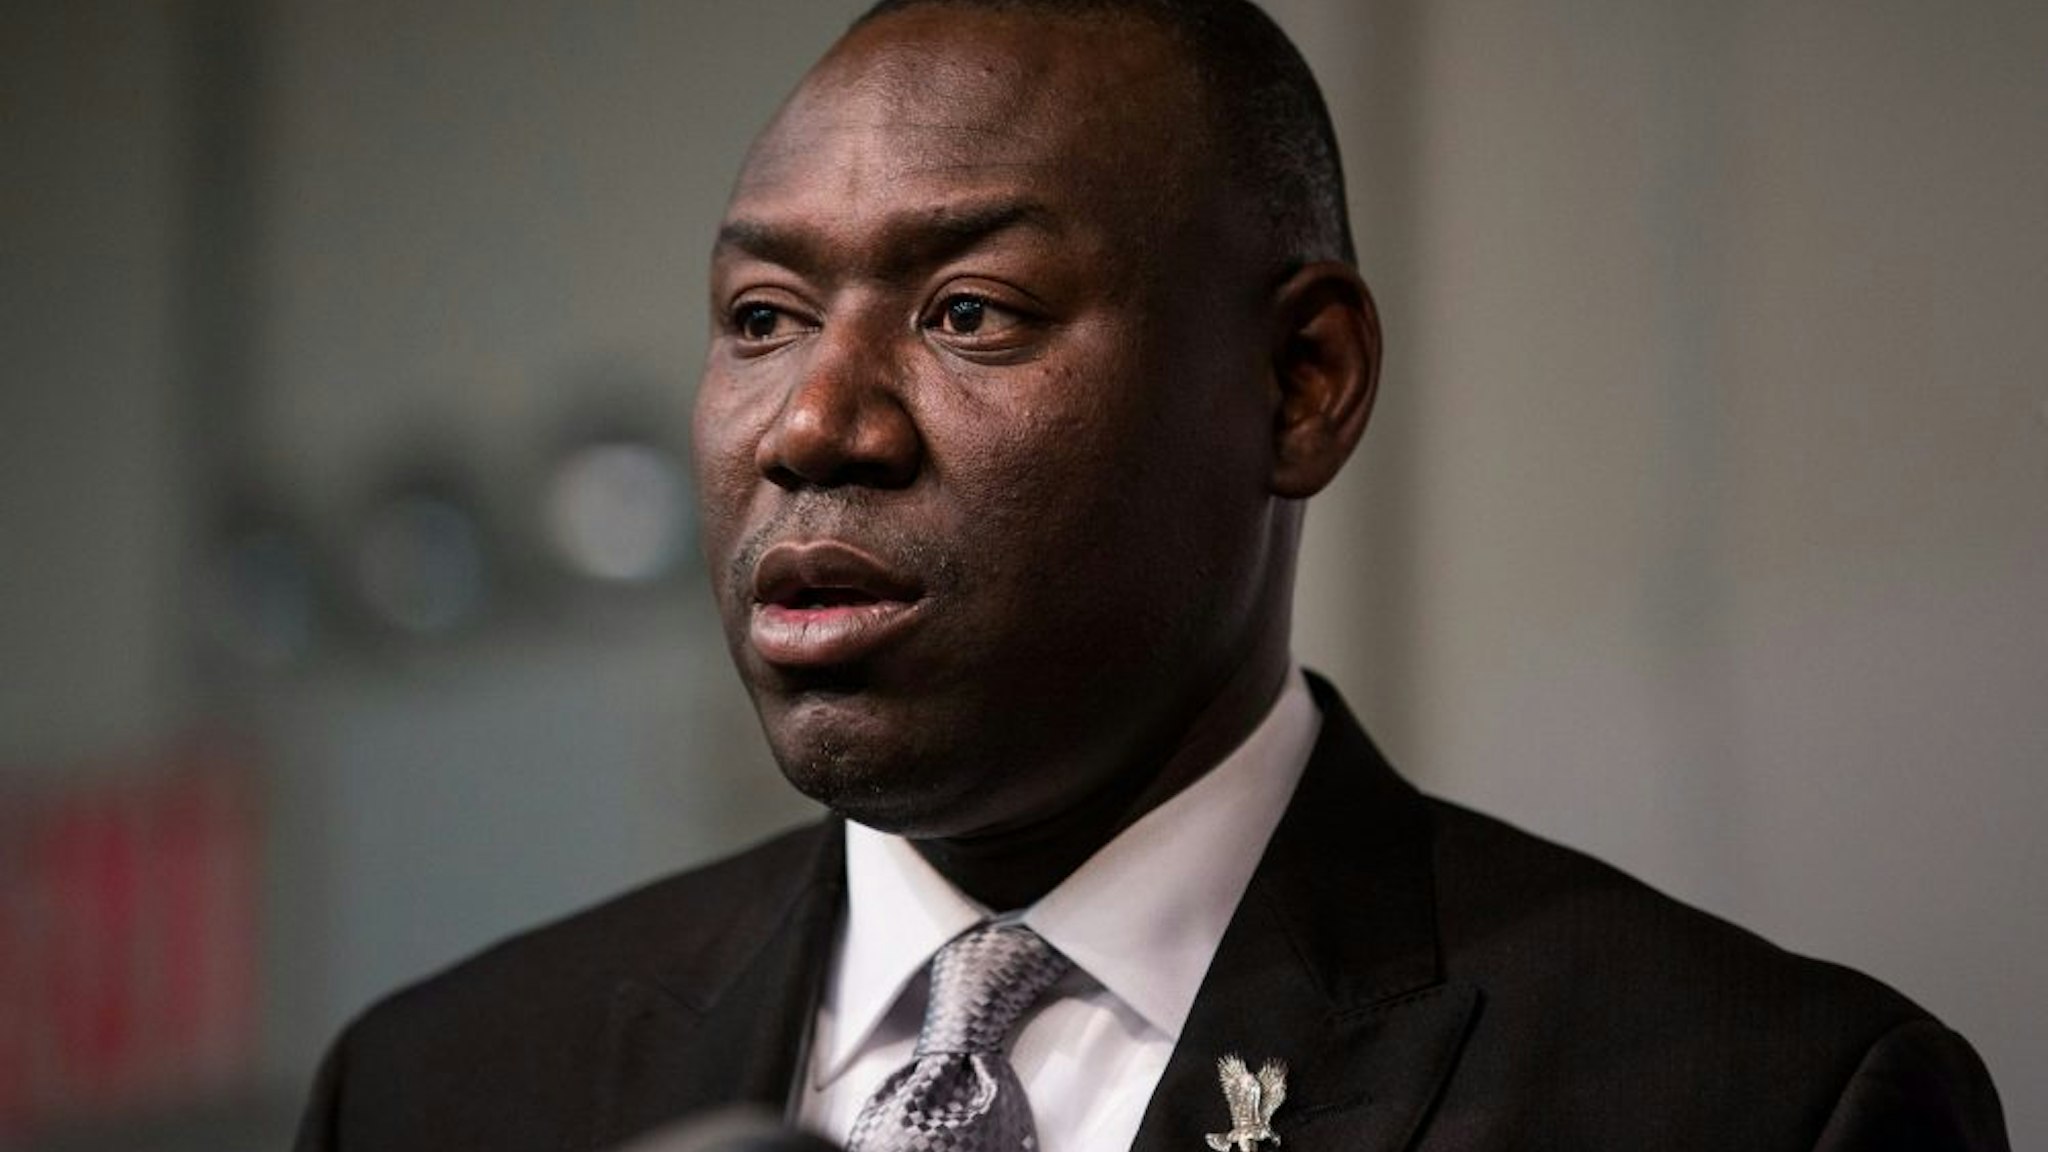 NEW YORK, NY - NOVEMBER 26: Benjamin Crump, lawyer for Michael Brown Jr's family, speaks at a press conference on the eve of Thanksgiving to pray and address the events of the last few days regarding the grand jury verdict of police officer Darren Wilson on November 26, 2014 in New York City. Wilson shot and killed Michael Brown Jr in Ferguson, MO, on August 9, 2014.